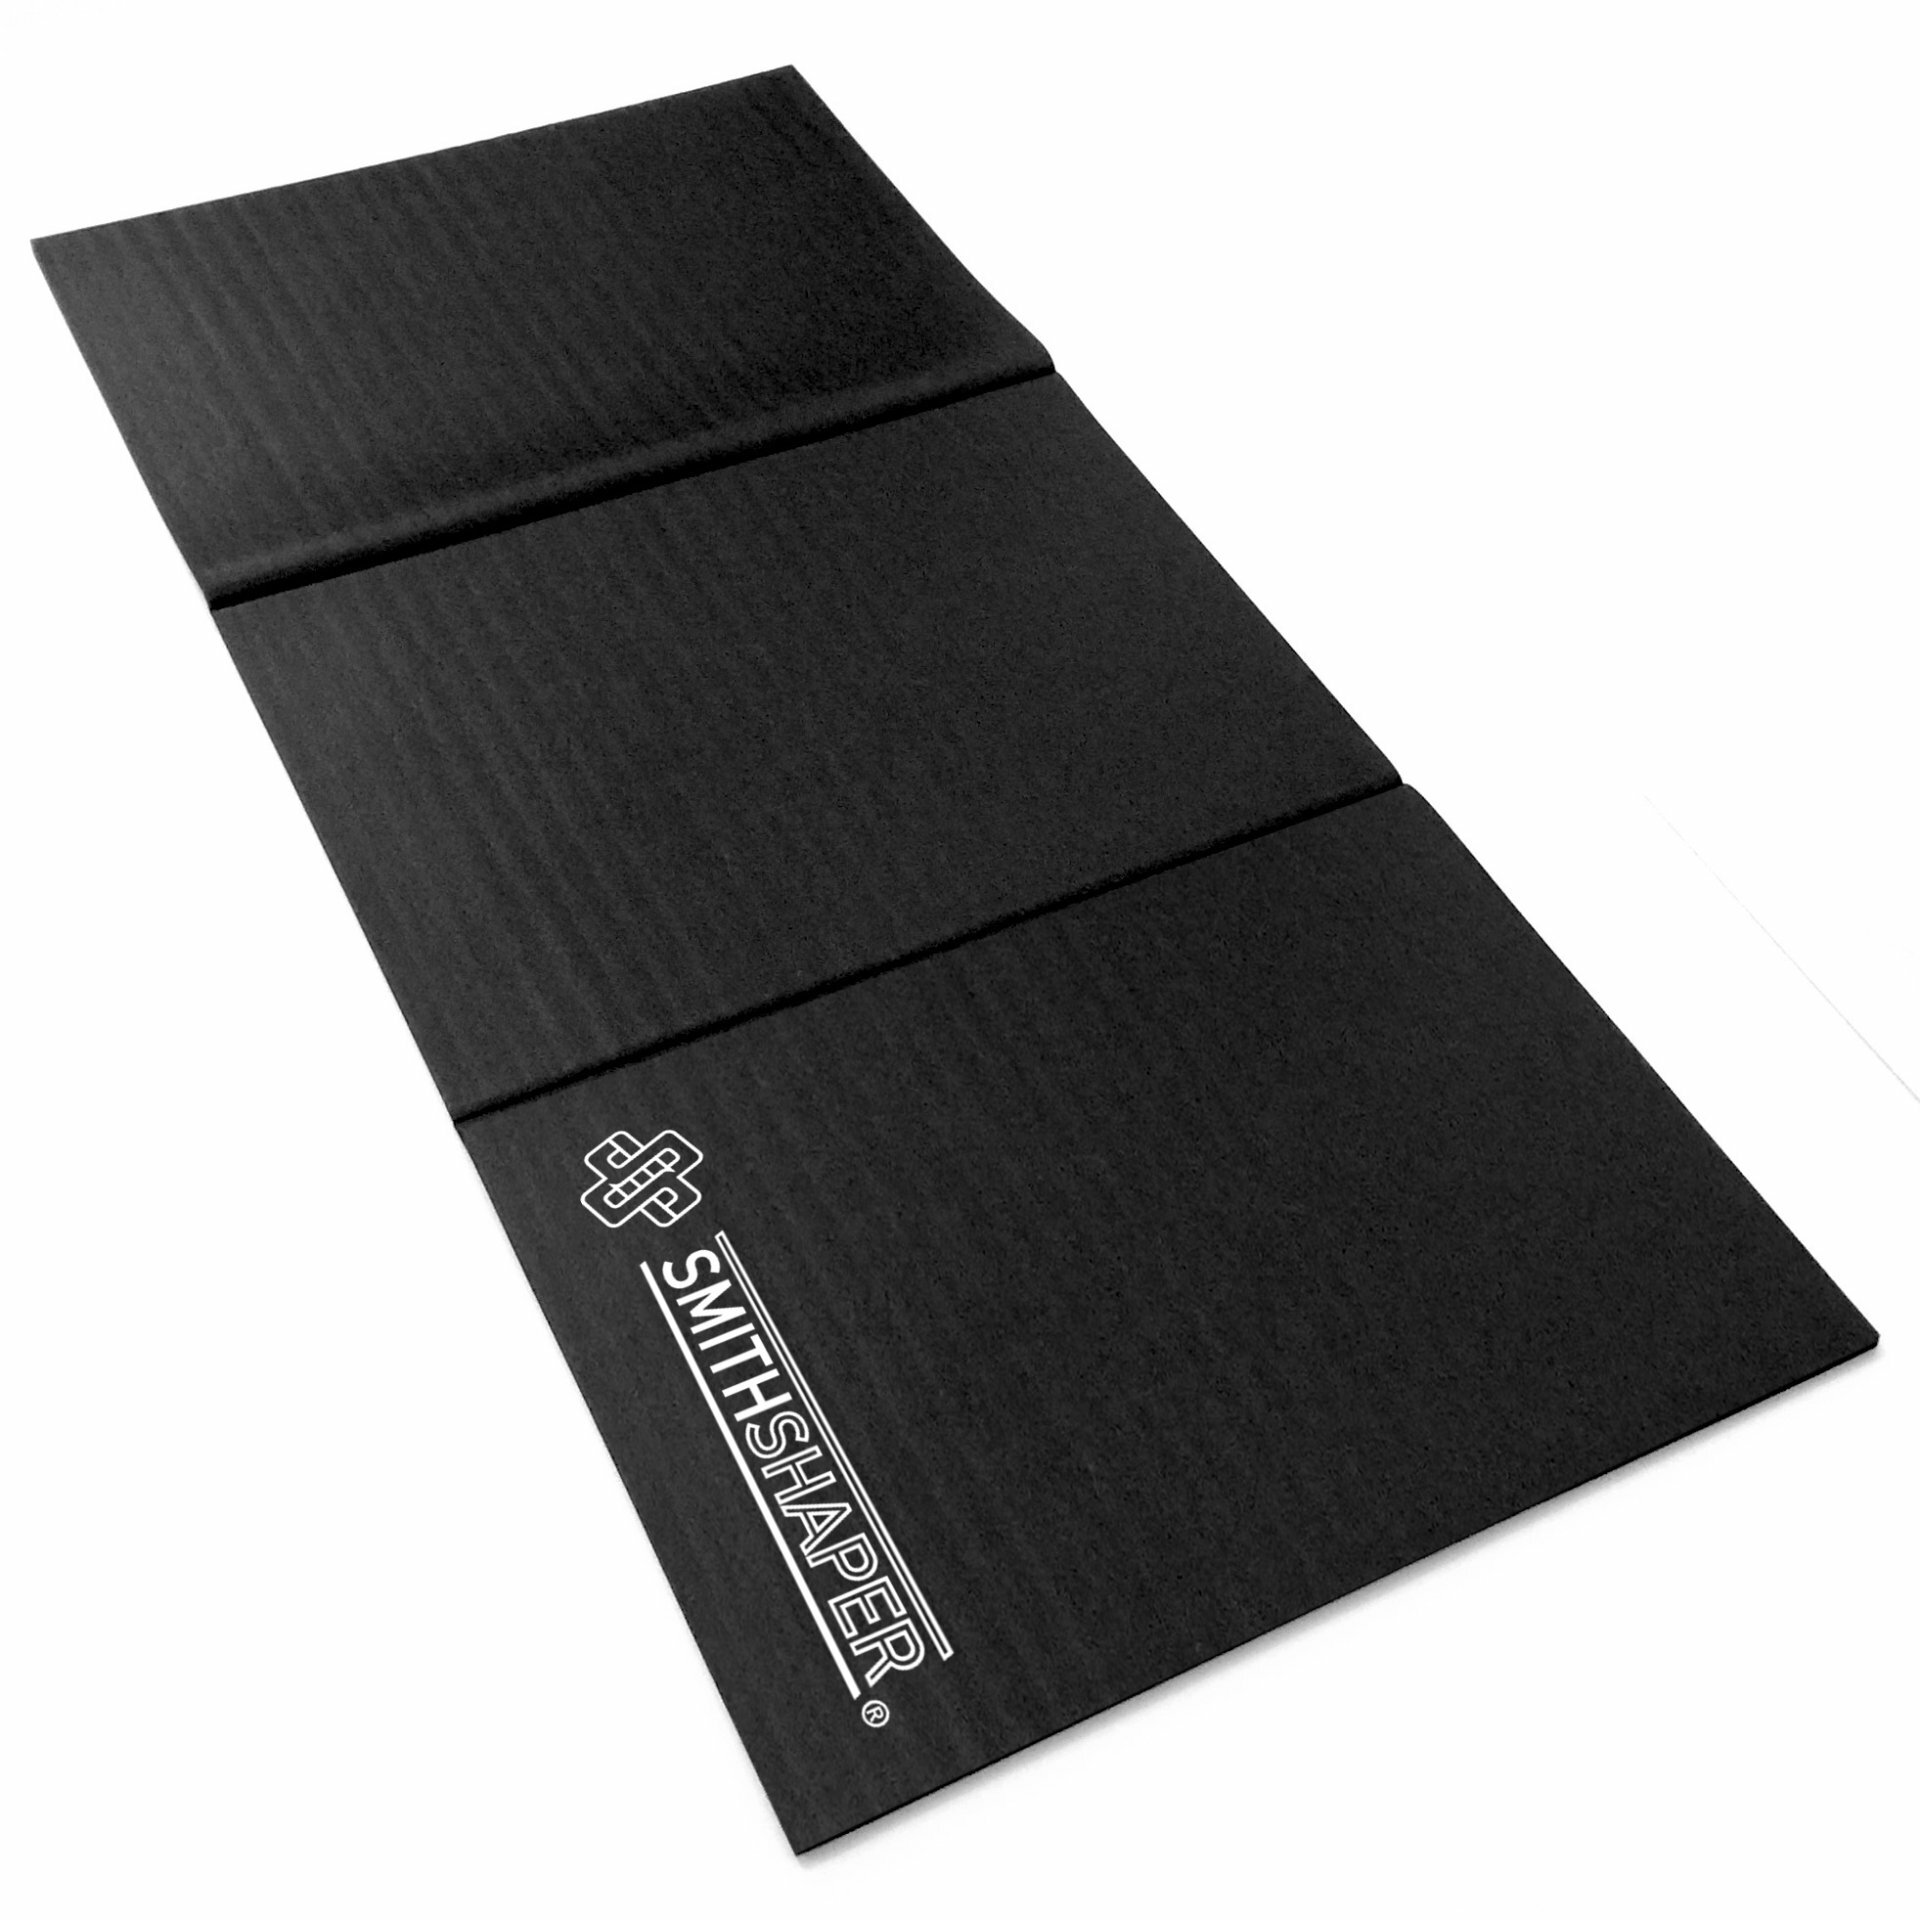 1.5 inch thick & protective Kneeling Mat SMITHSHAPER Original Exercise Pad 